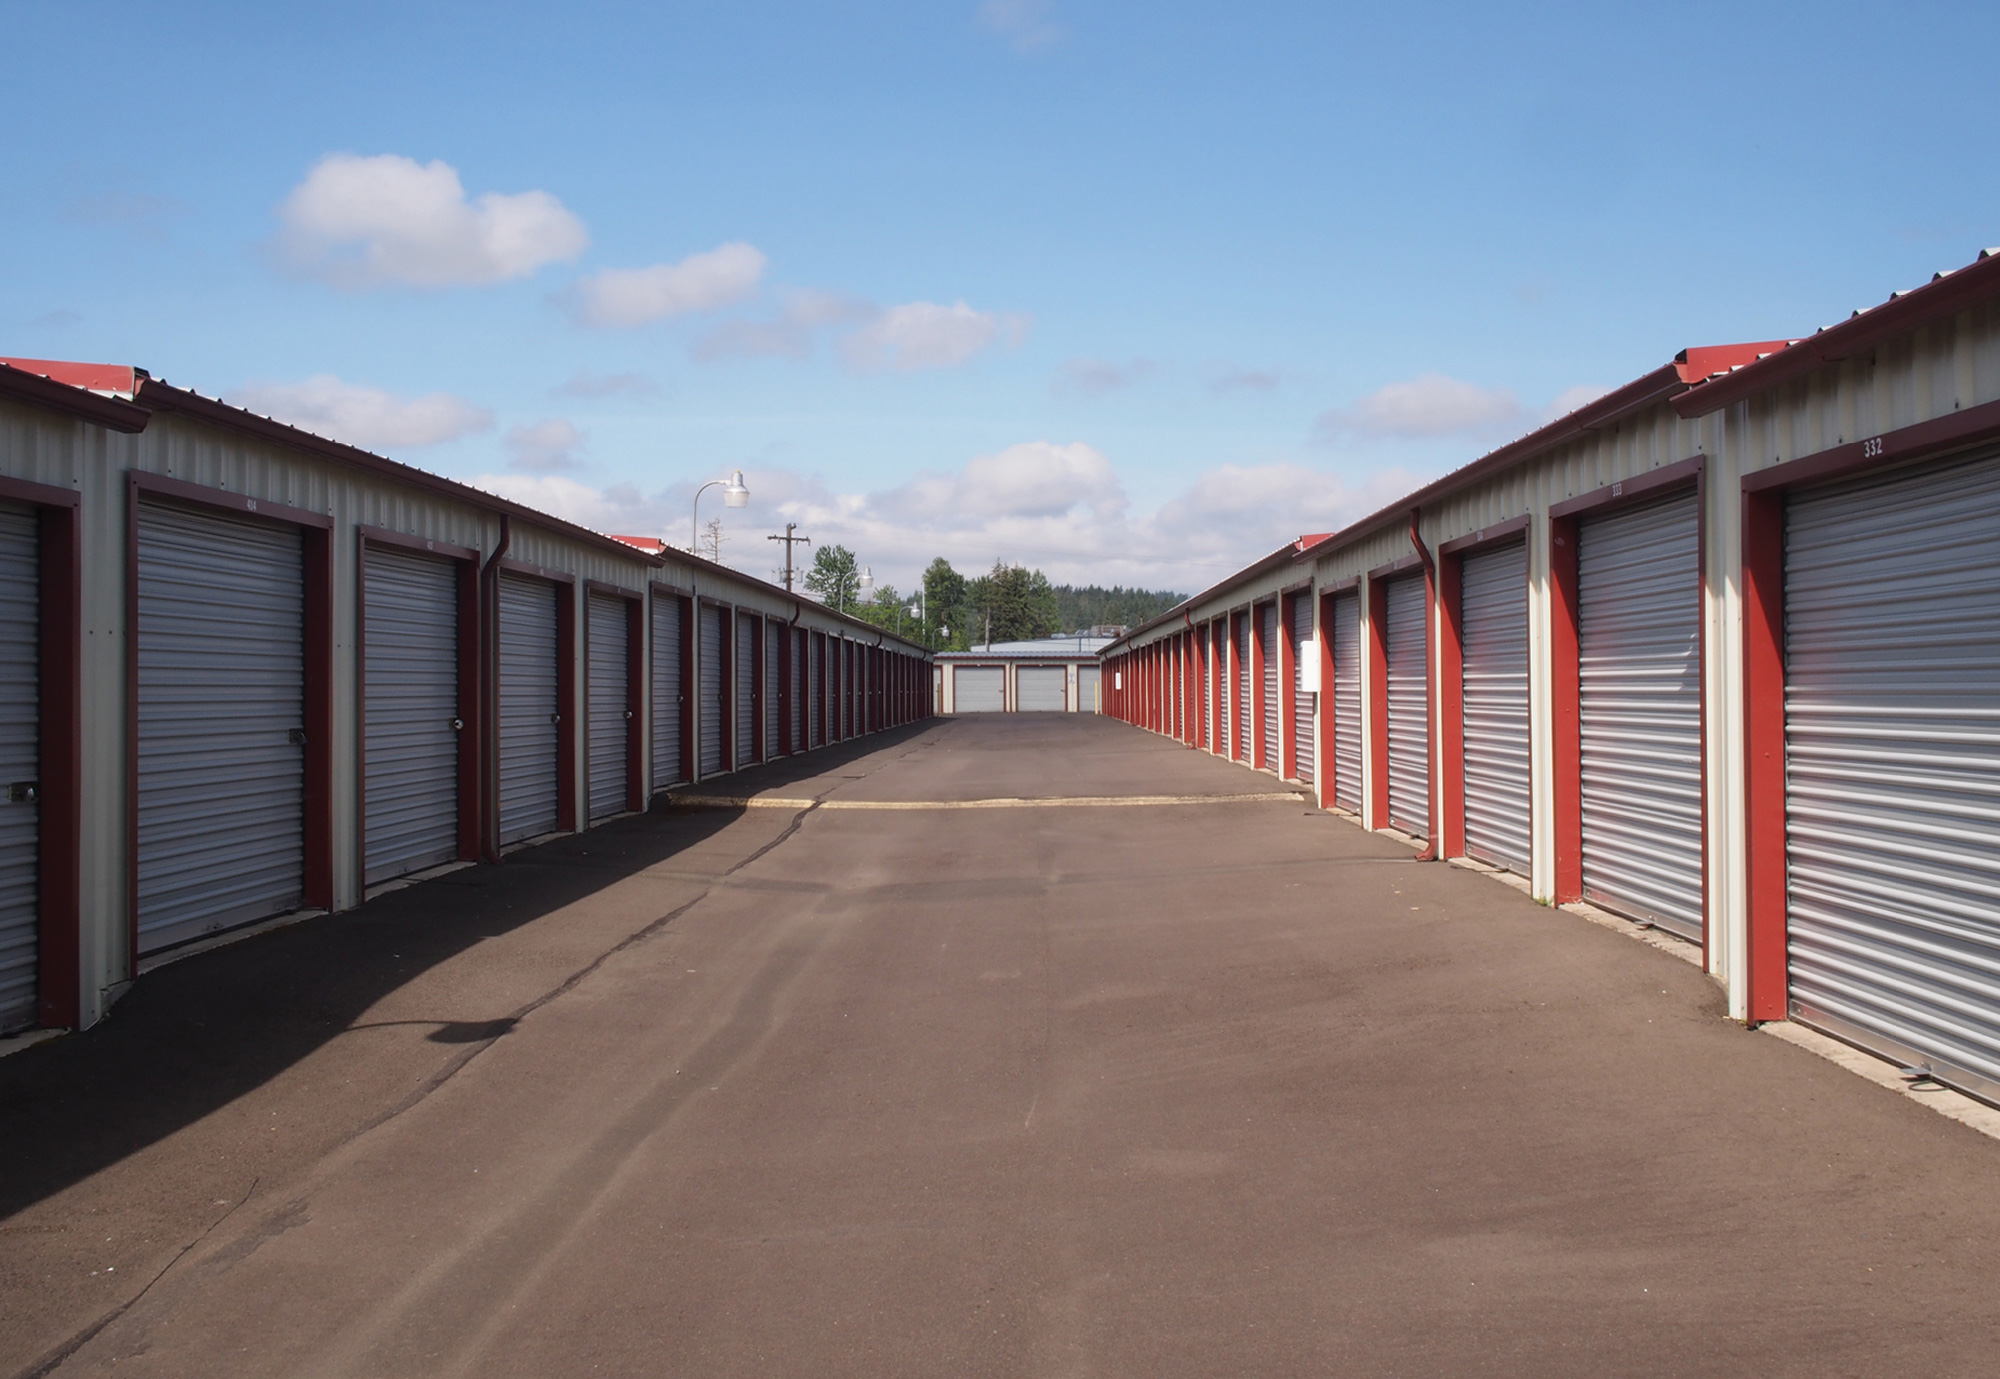 A photograph of several doors to storage units.